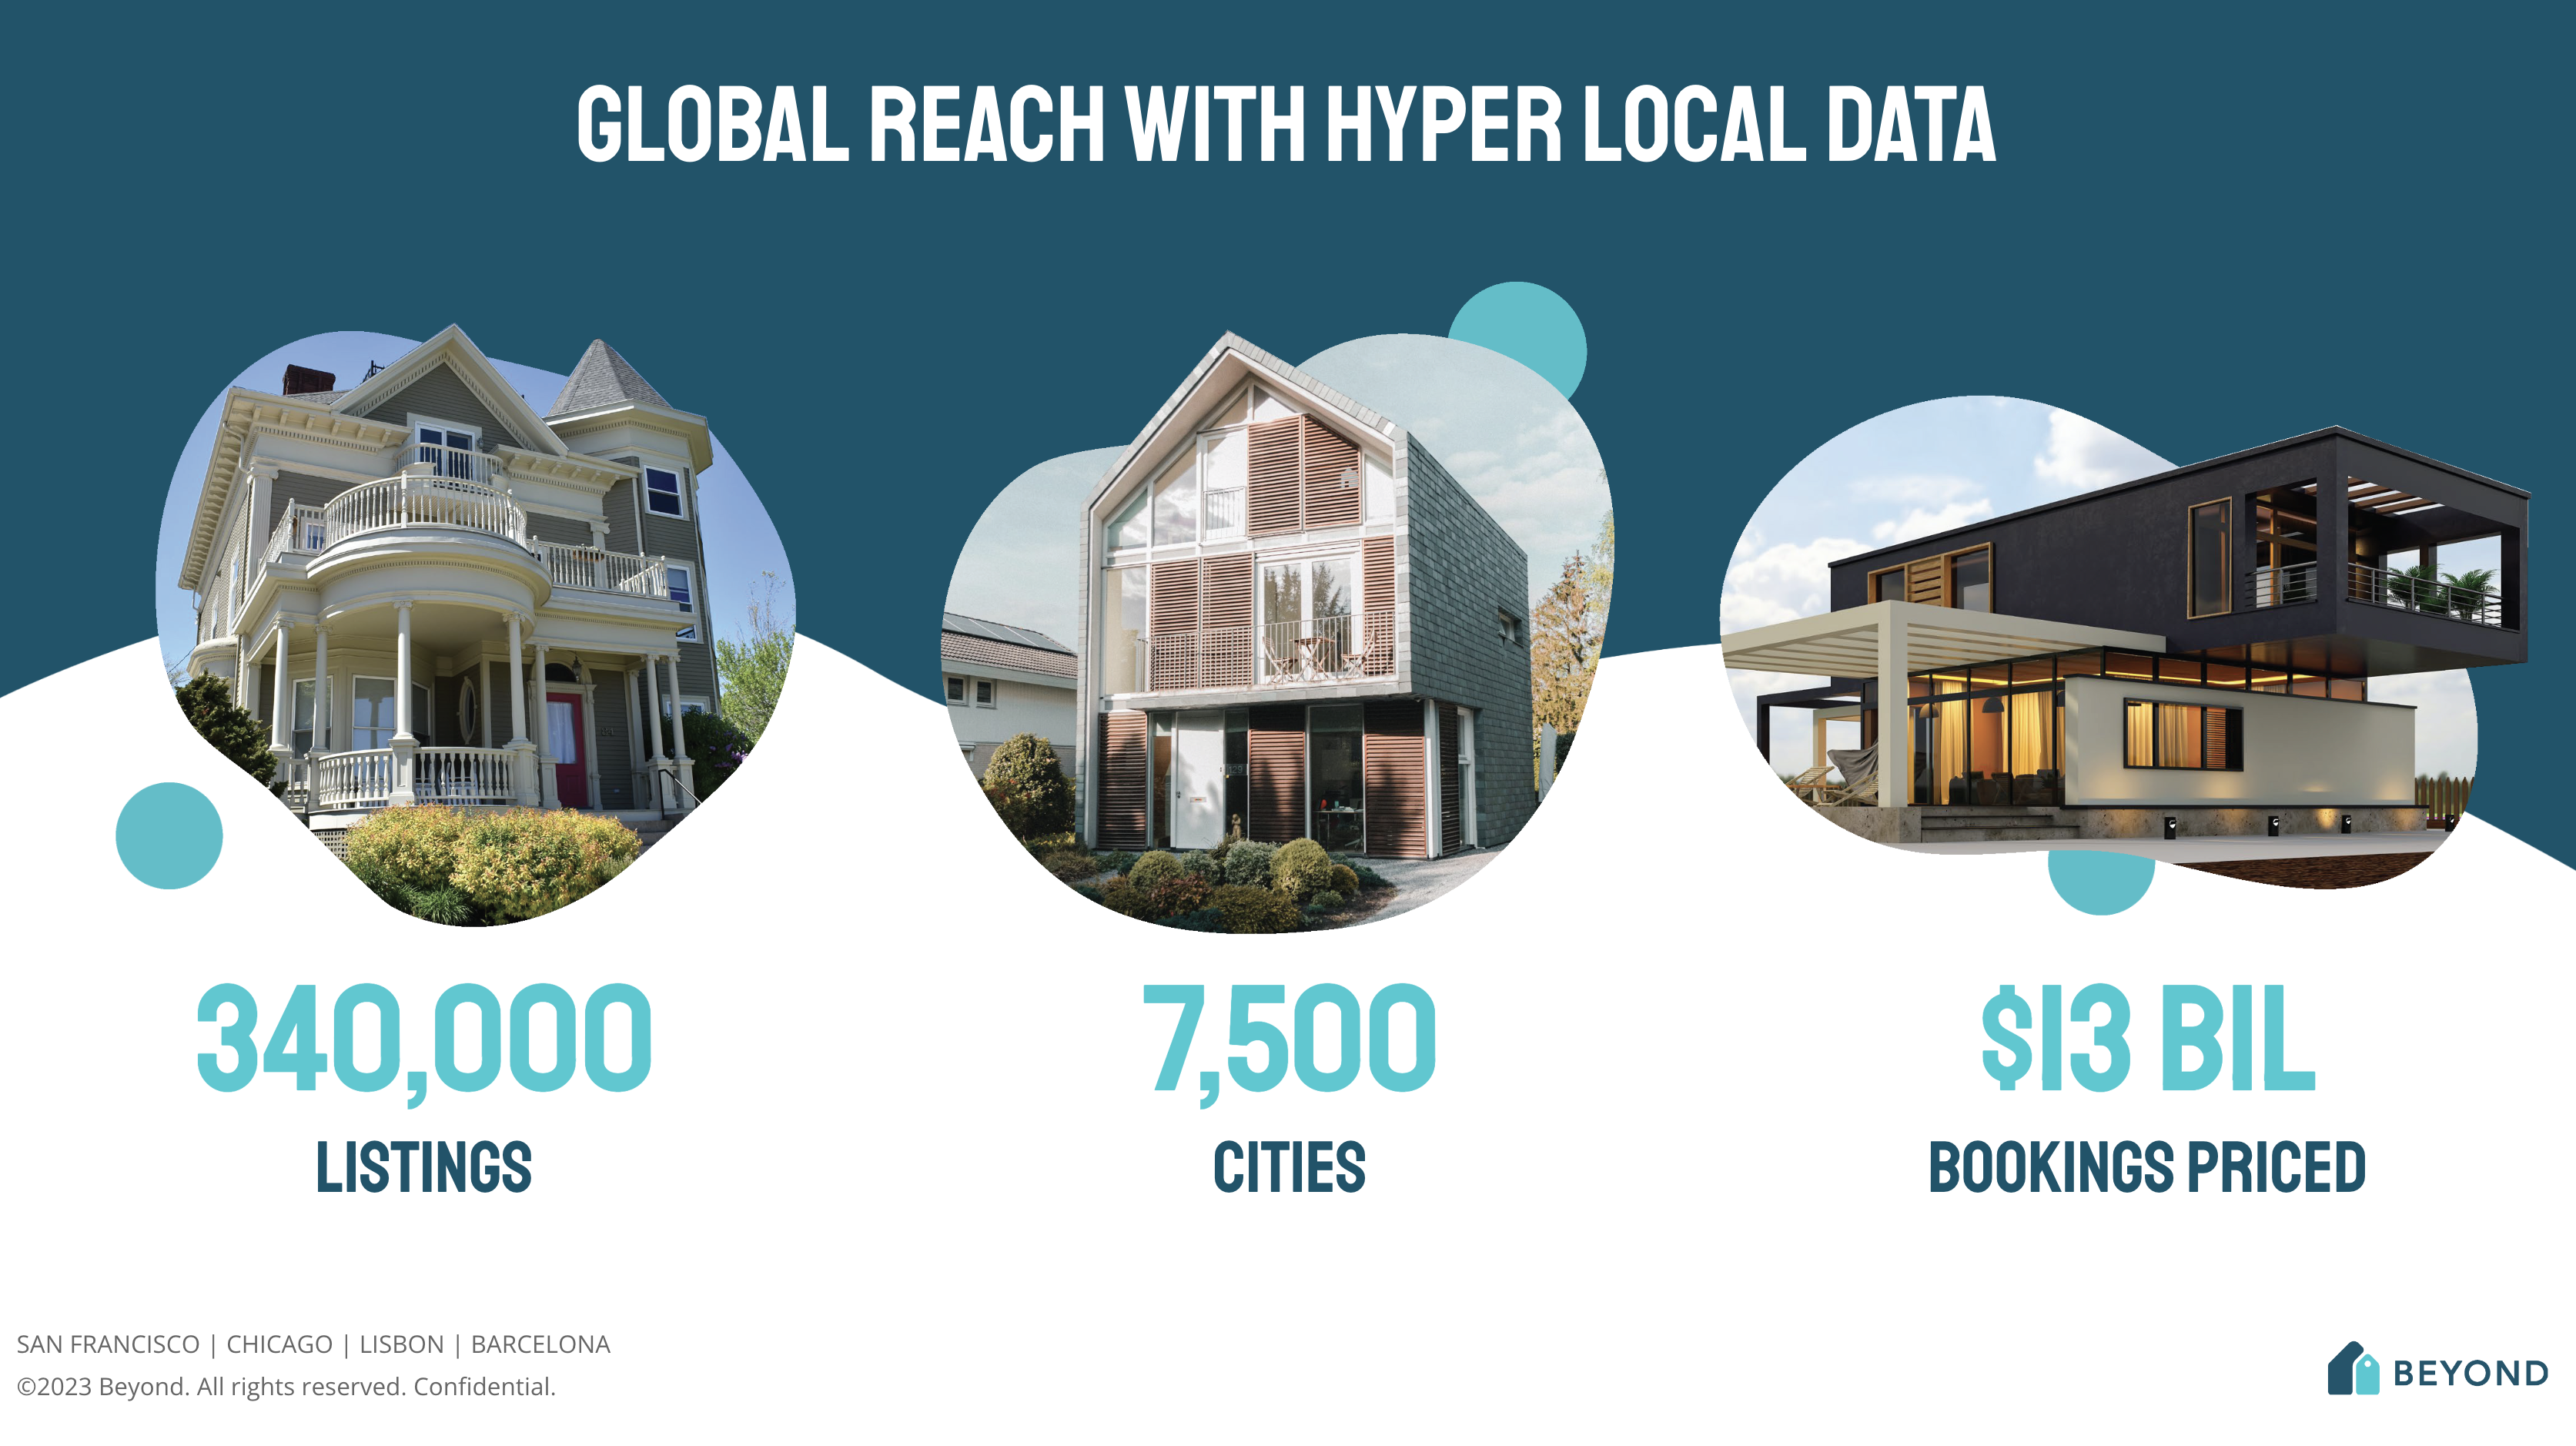 To date, we’ve helped on 330,000+ listings in more than 7,000 cities worldwide. Our partners have seen as much as a 40% increase in booking revenue by leveraging the tools on our platform.